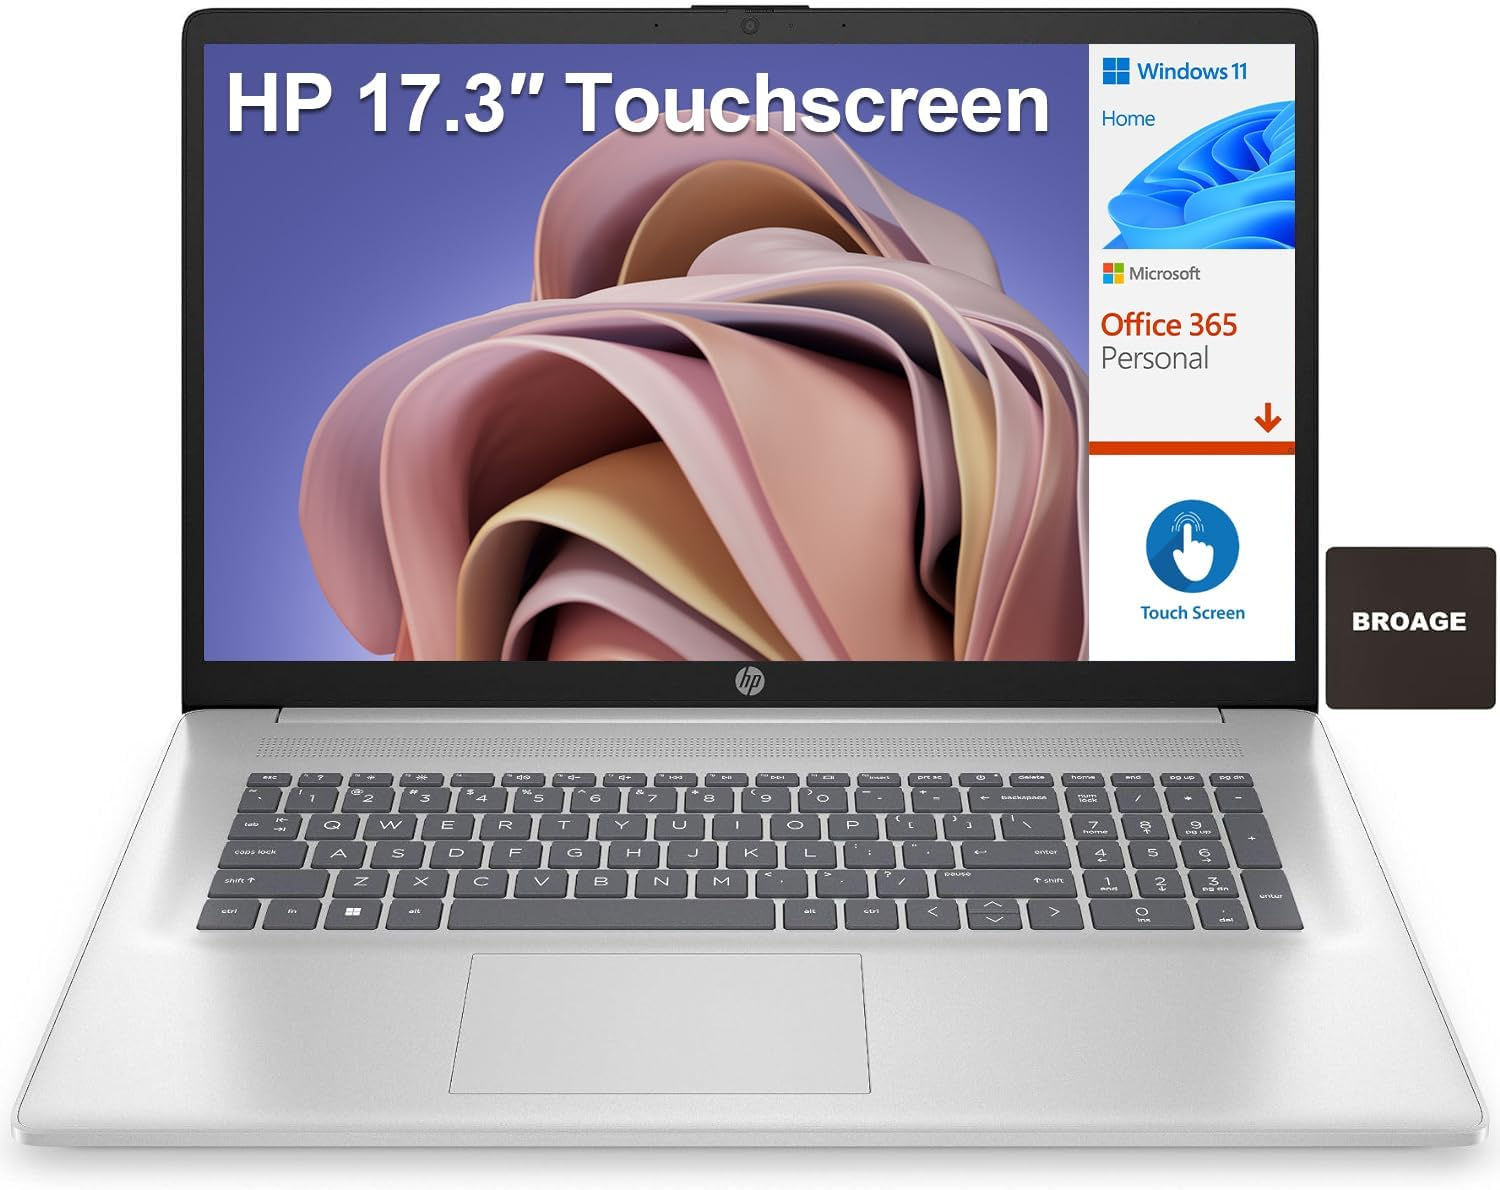 HP 17 17.3 Touchscreen HD+ Laptop Computer, Intel Pentium Silver N5030 up to 3.1GHz, 16GB DDR4 RAM, 1TB PCIe SSD, 802.11AC WiFi, Bluetooth 5.0, 1-Year Office 365, Silver, Windows 11 Home S, BROAG